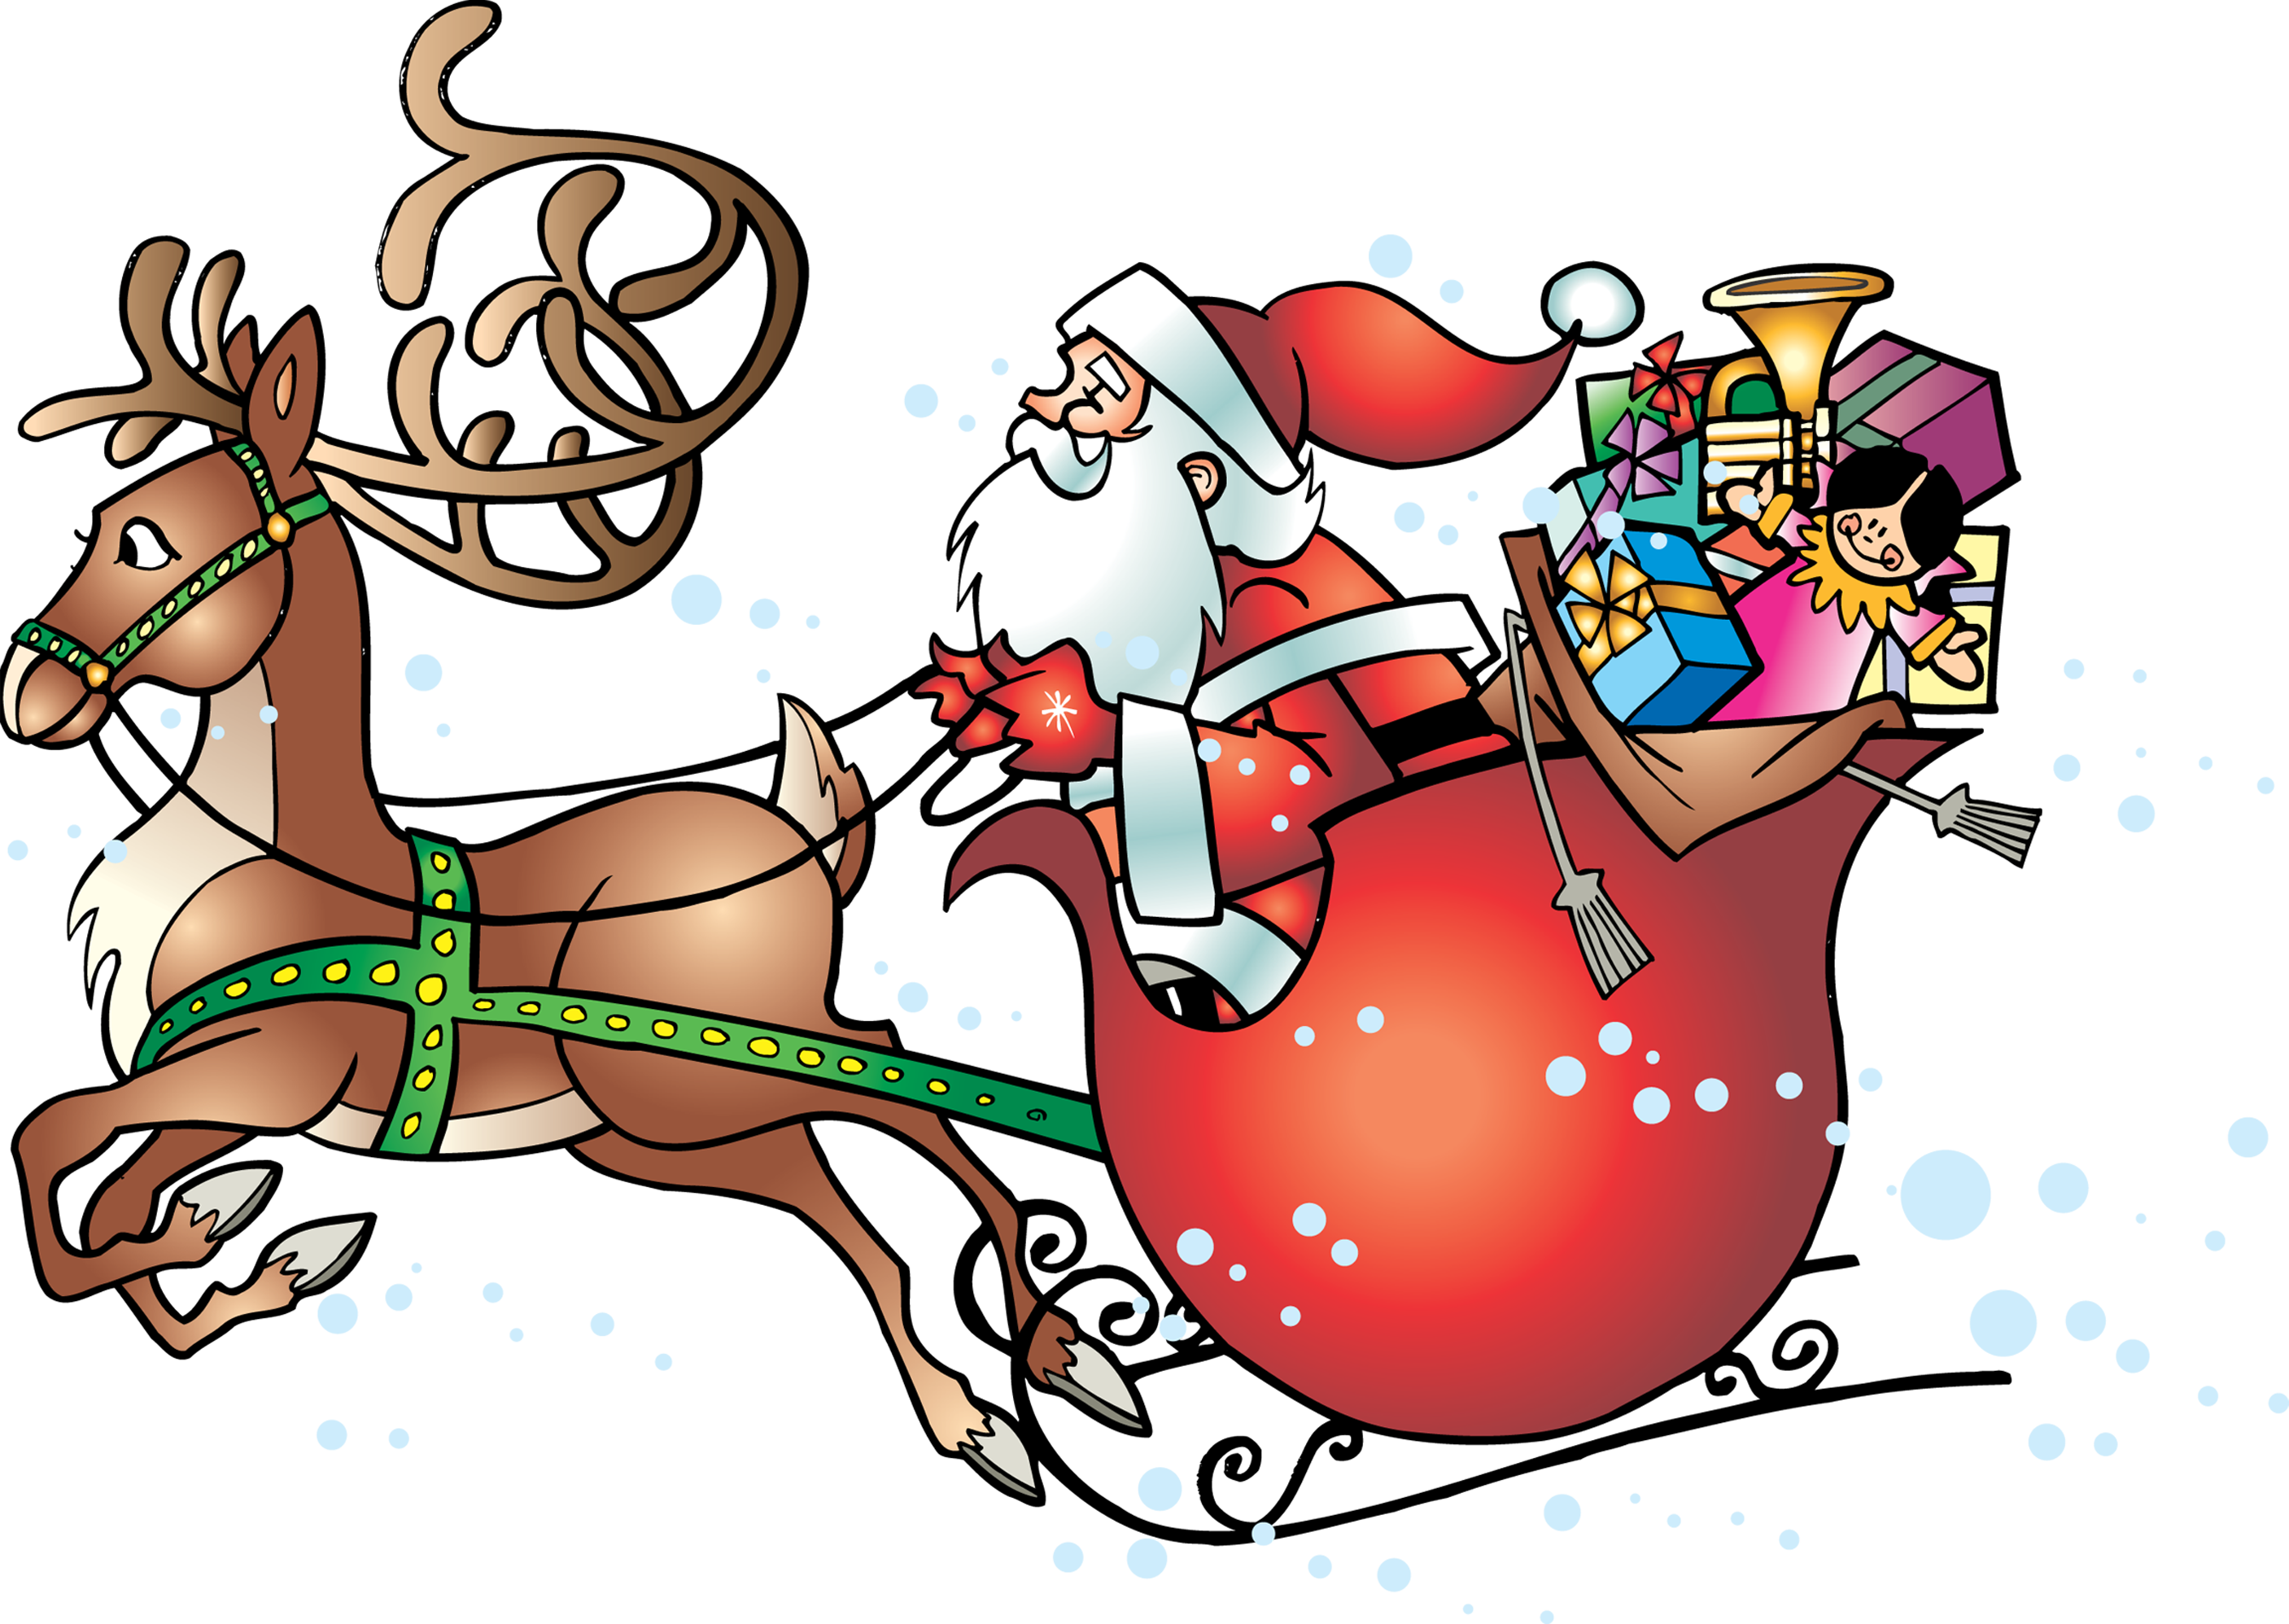 santa sleigh png image collection for download crazypngm crazy png images download 30514